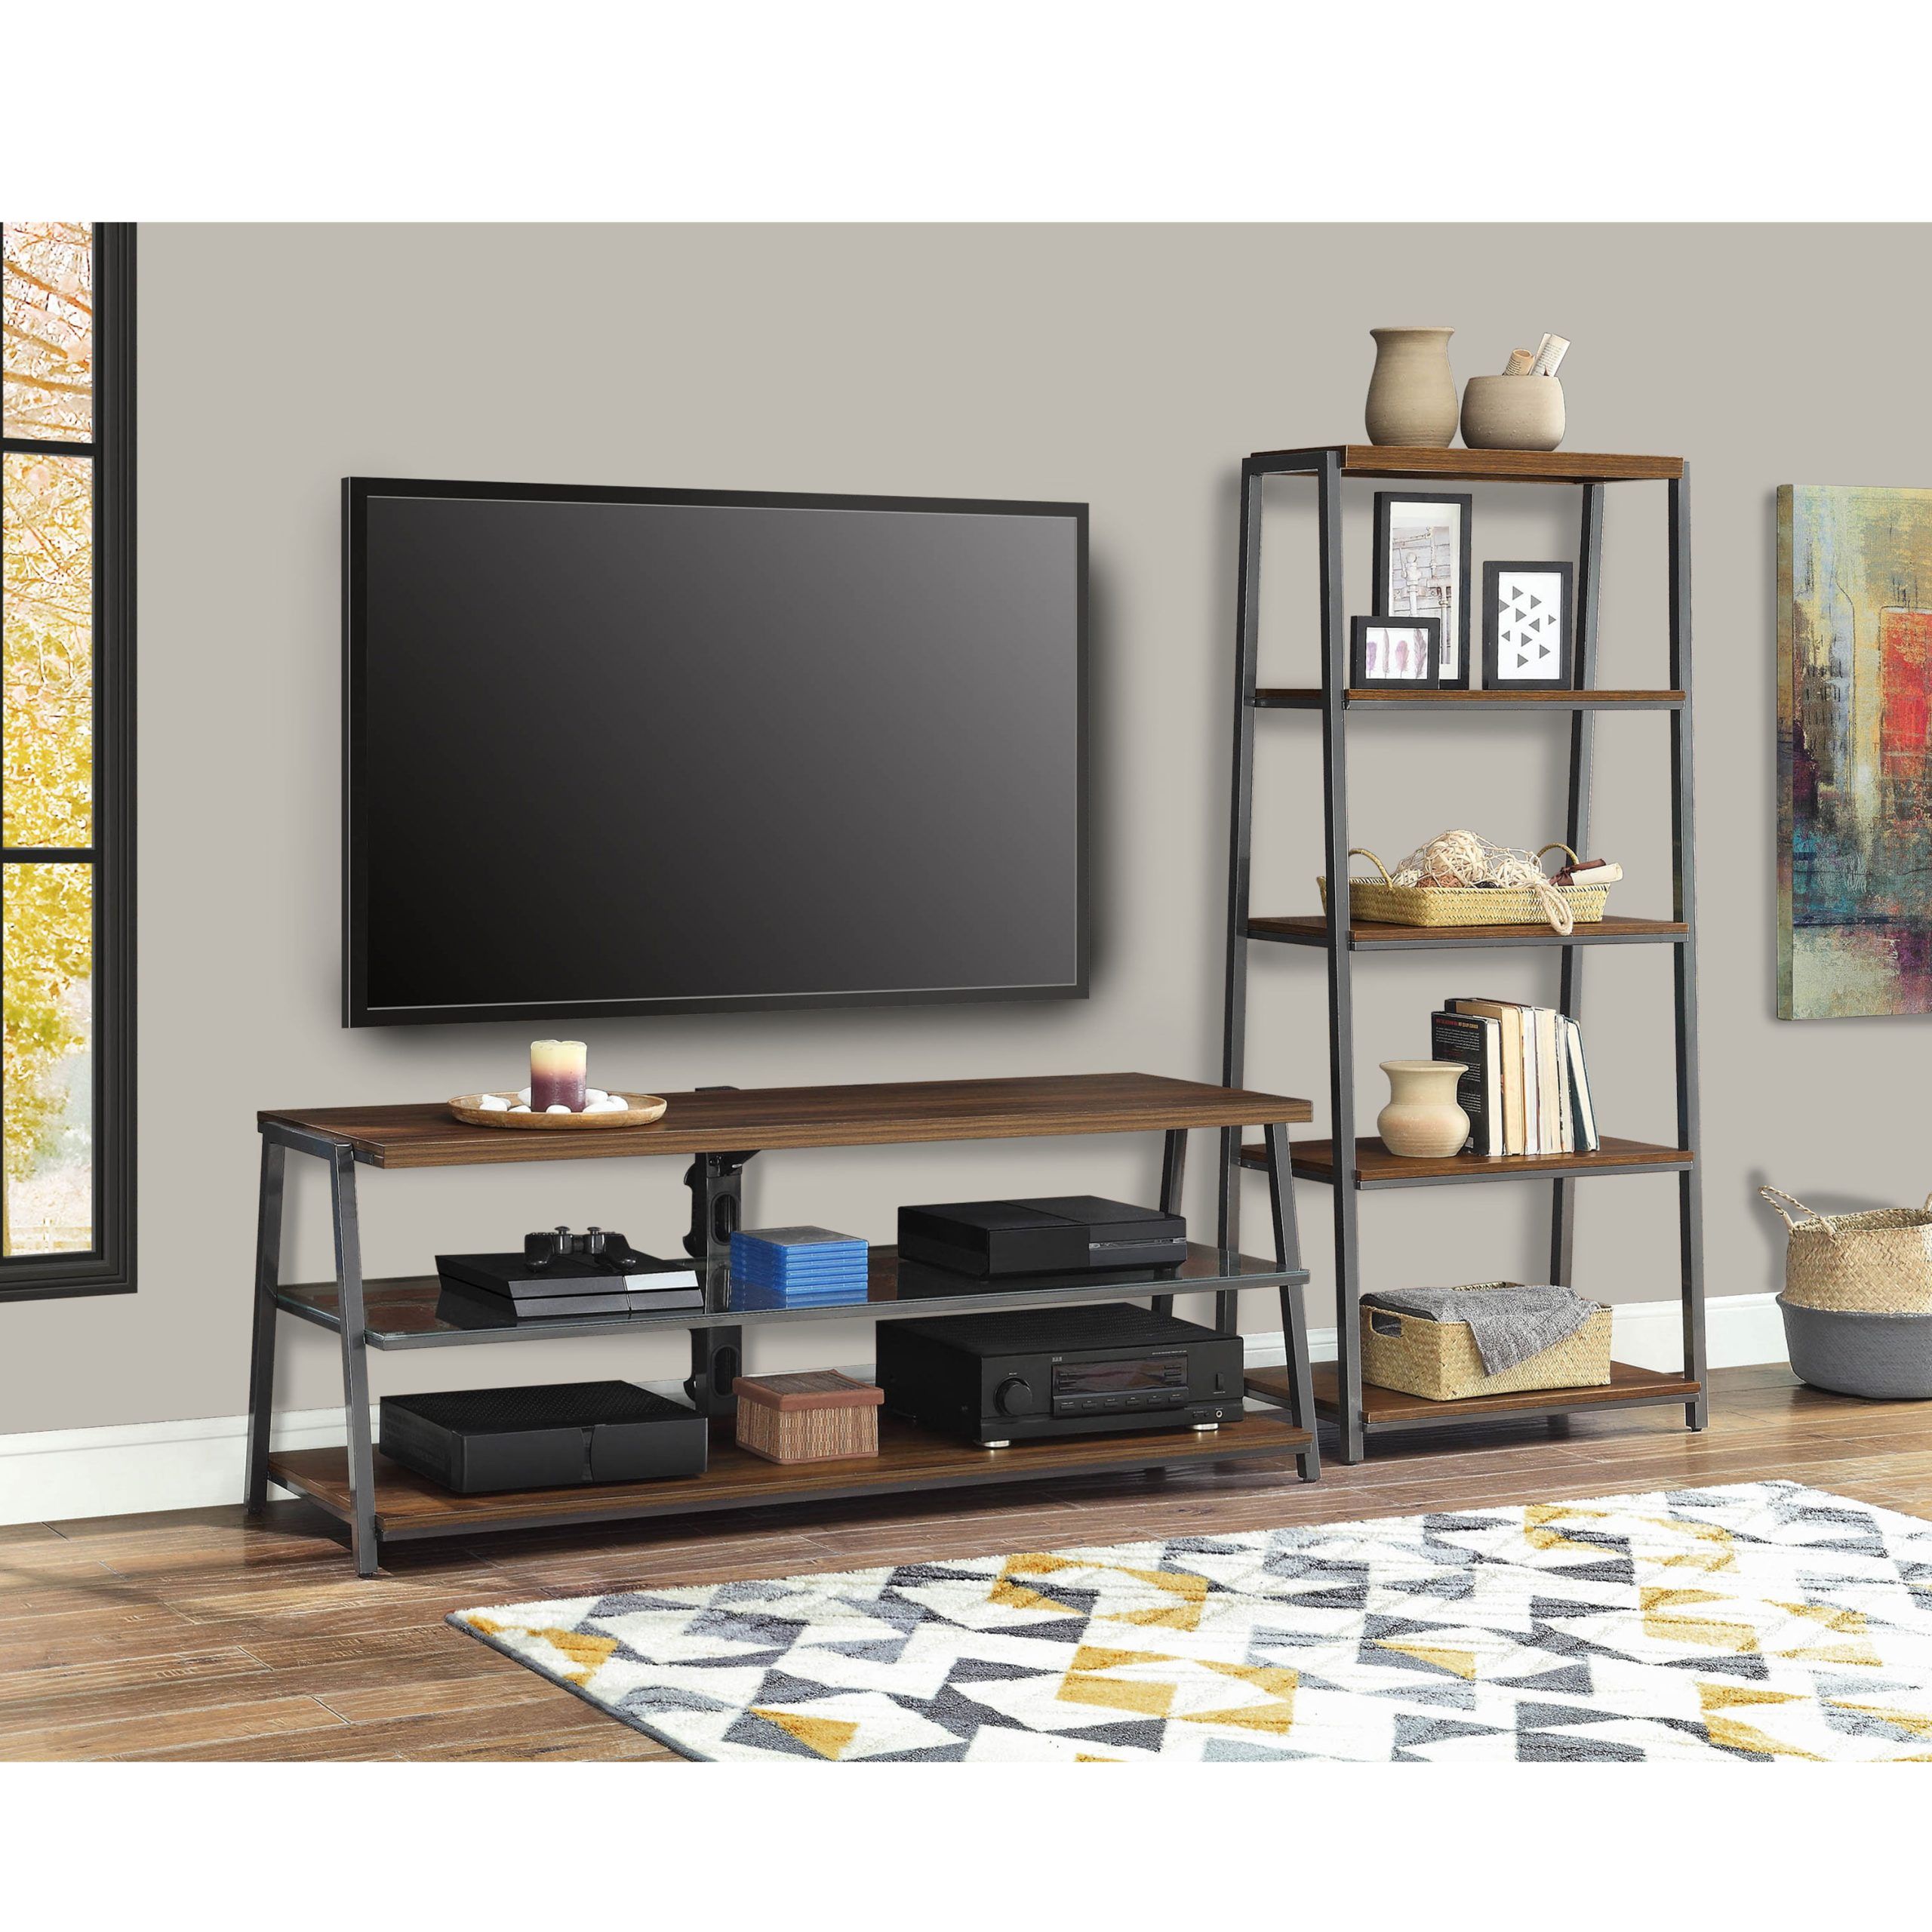 Mainstays Arris Tv Stand For 70" Flat Panel Tvs And 4 Shelf Tower Book Inside Top Shelf Mount Tv Stands (Gallery 9 of 20)